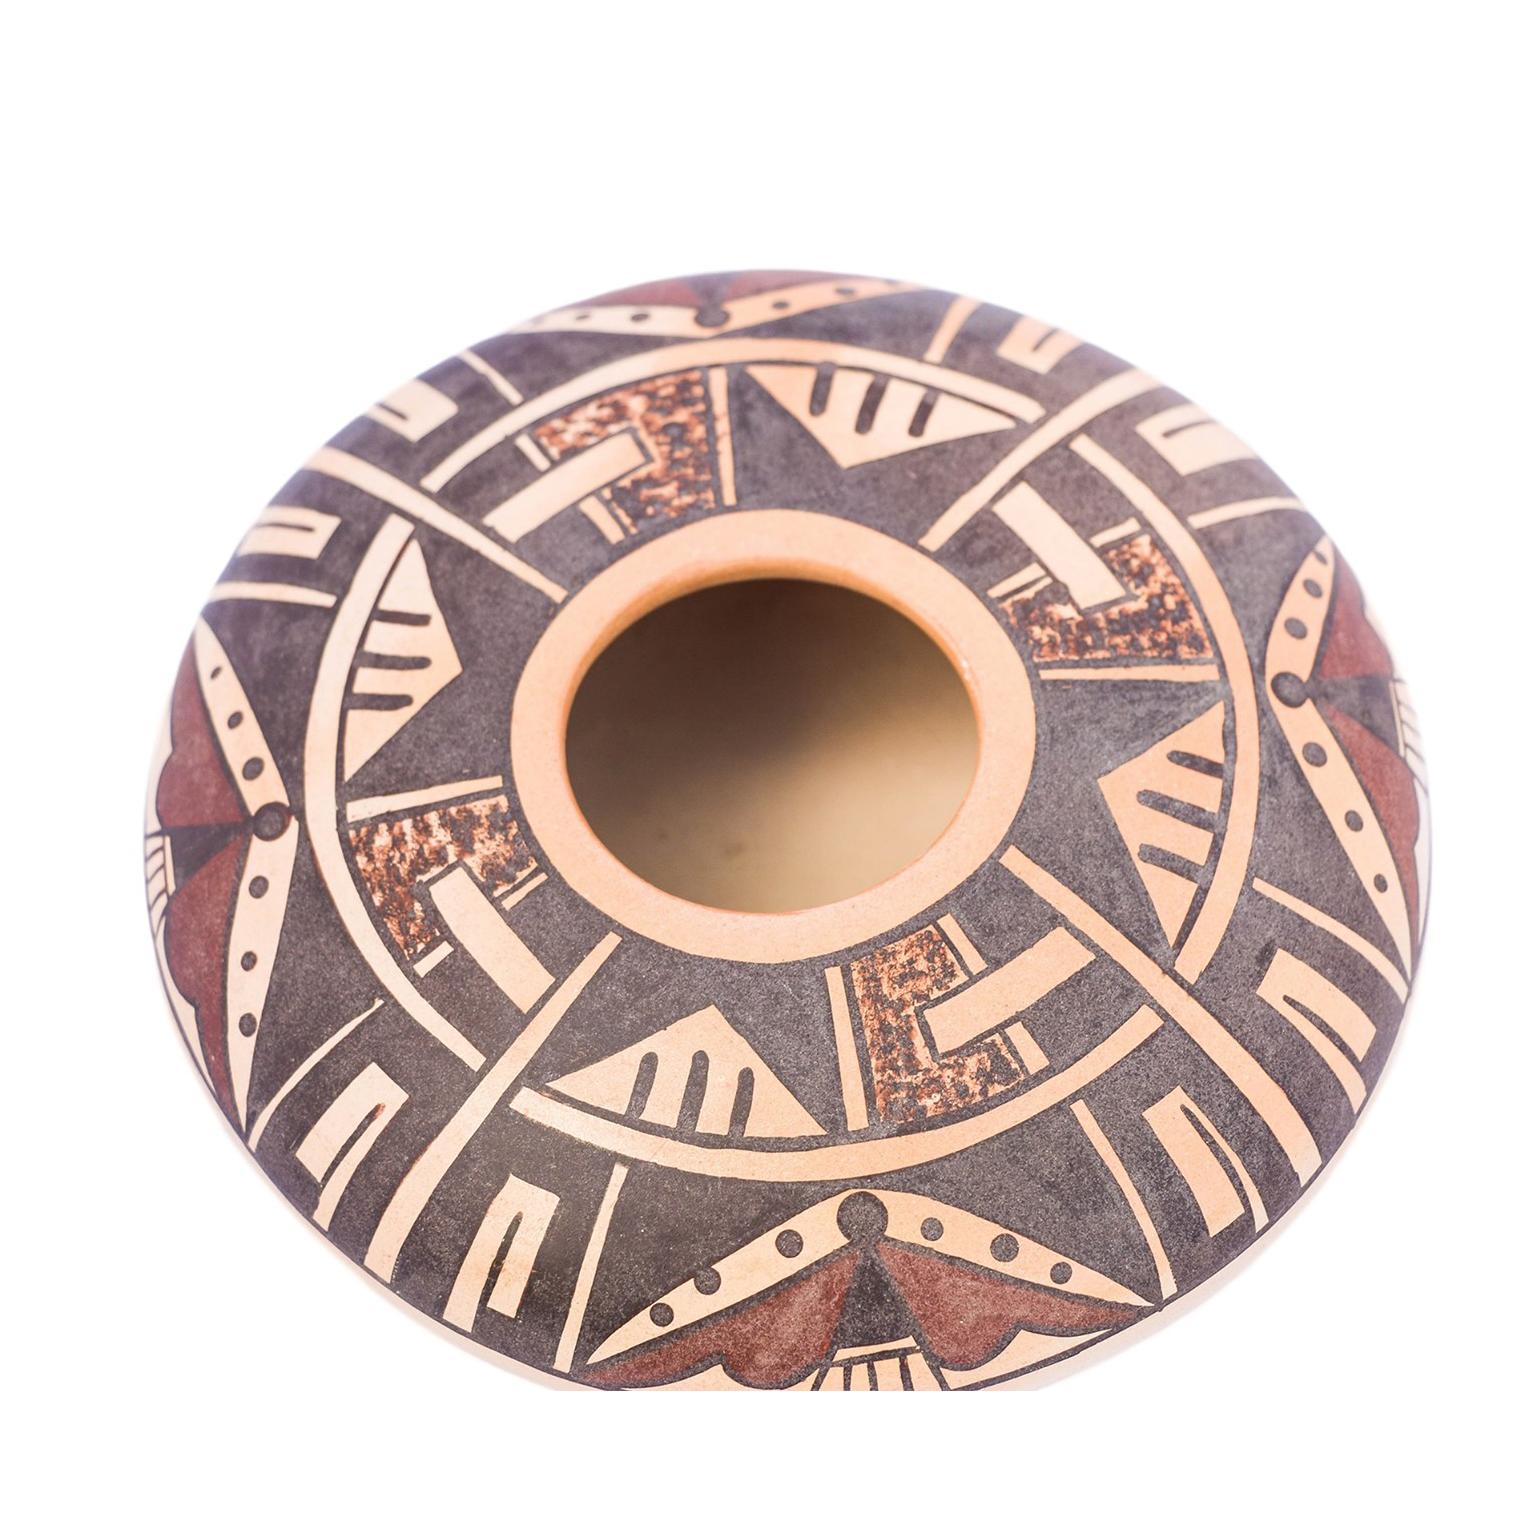 Seed bowl with polychrome geometric and stylised motifs, the base with an inscription of Native American symbols and the word “Hopi” in a dark brown/black color. The center circling designs around the seed bowl have what appears to be stylistic